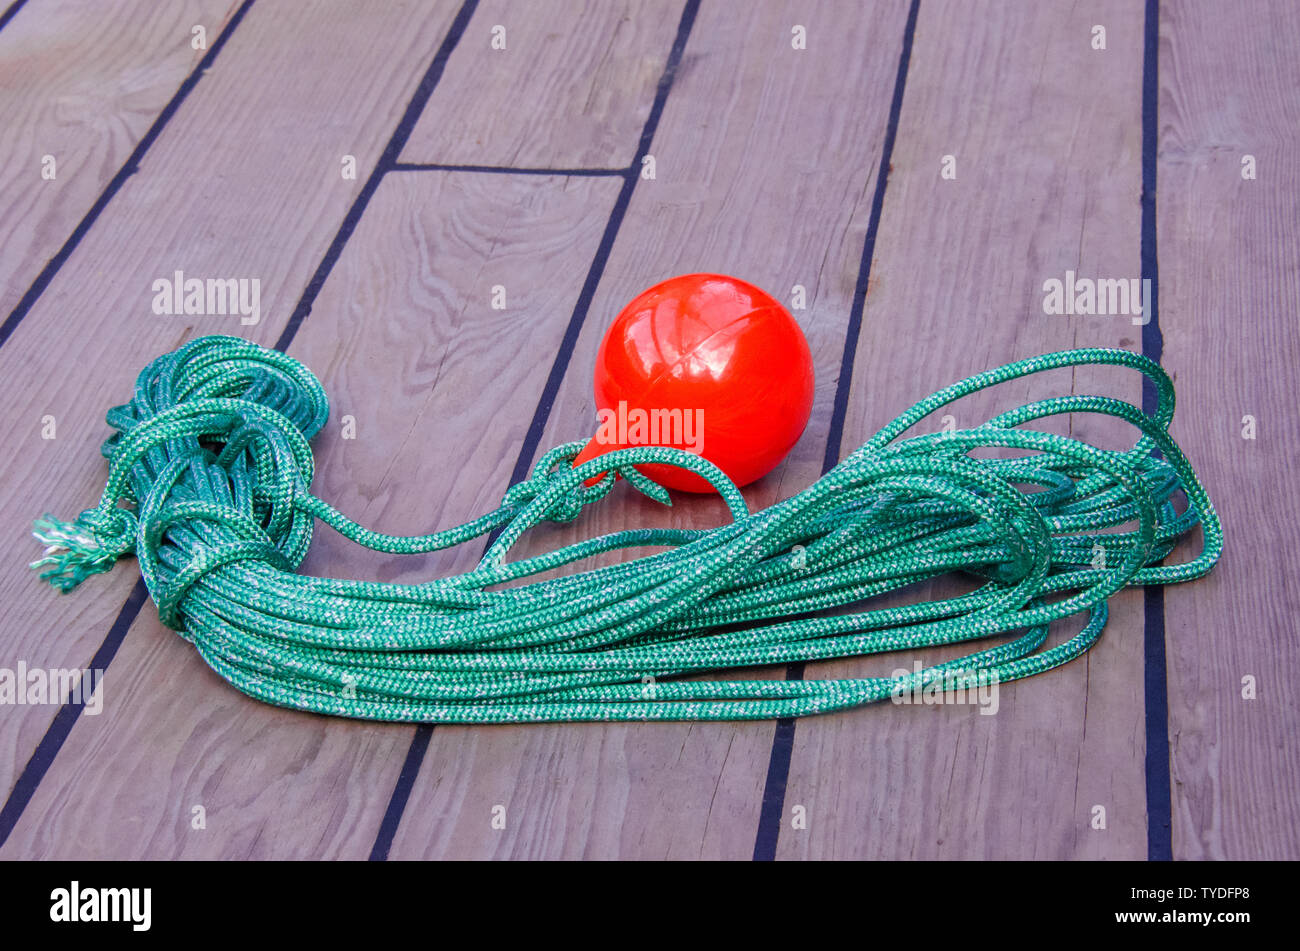 Sea tackle to facilitate the supply of the mooring cable to the shore. A coil of thin green rope with a plastic red ball on the end. Stock Photo